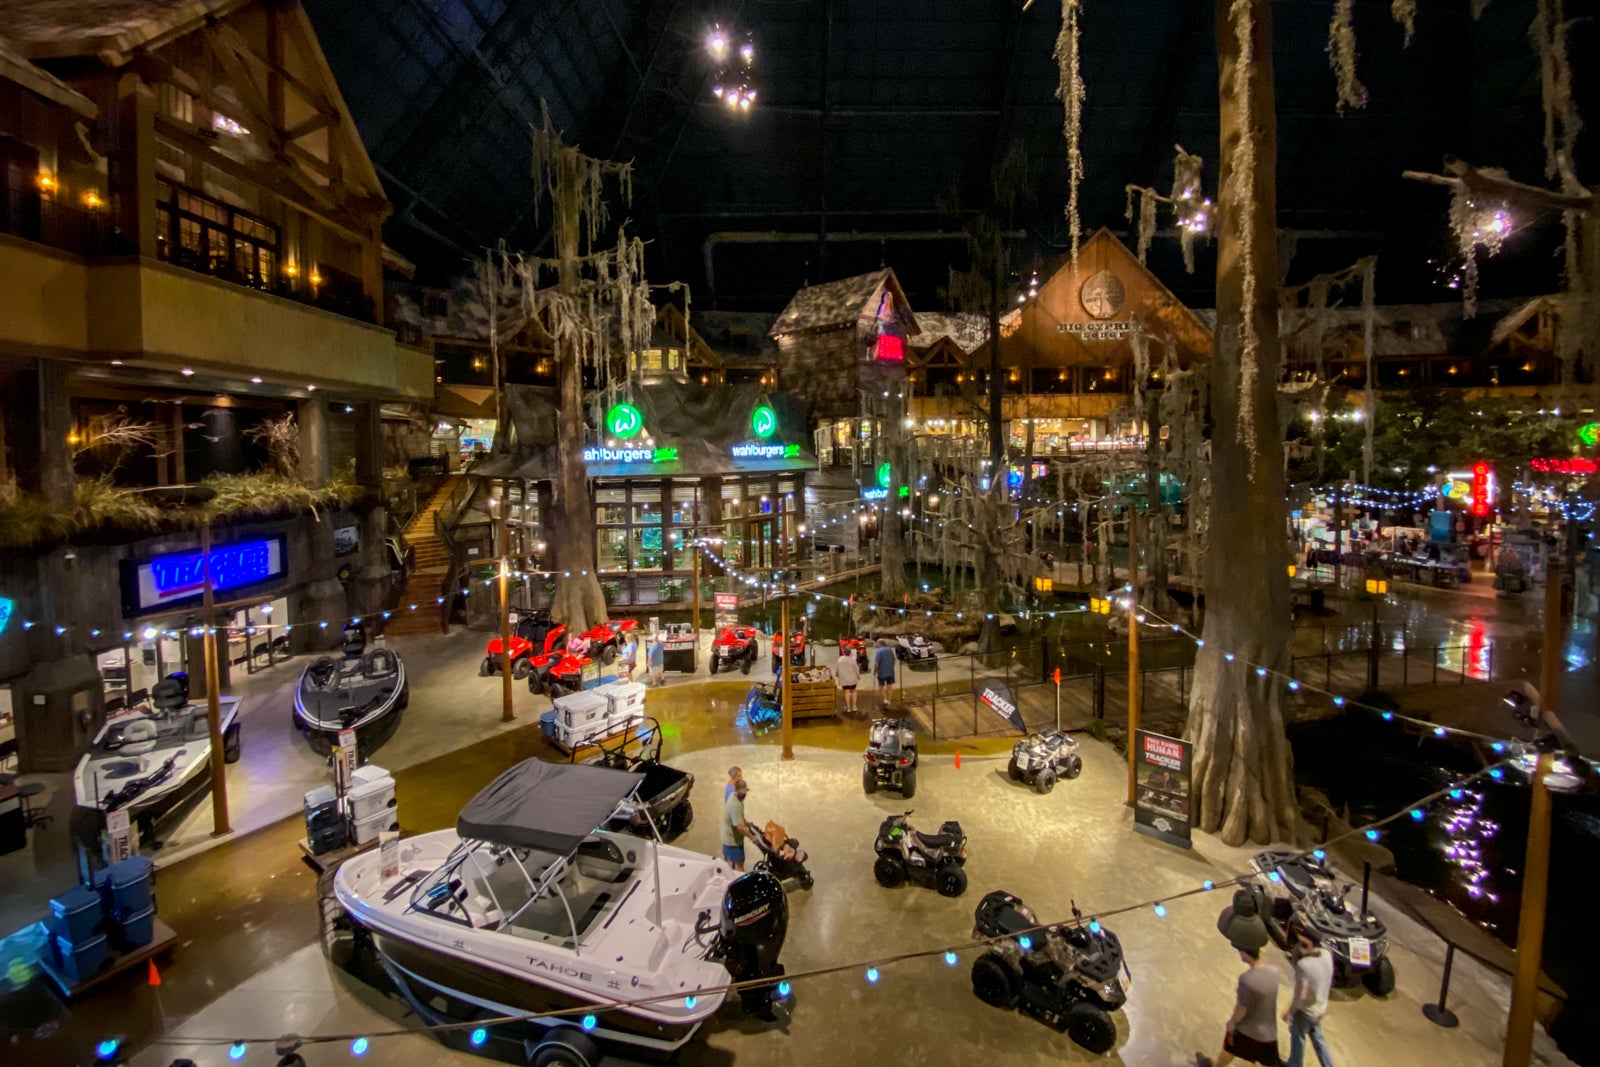 Bass Pro Shops in Memphis, Tennessee